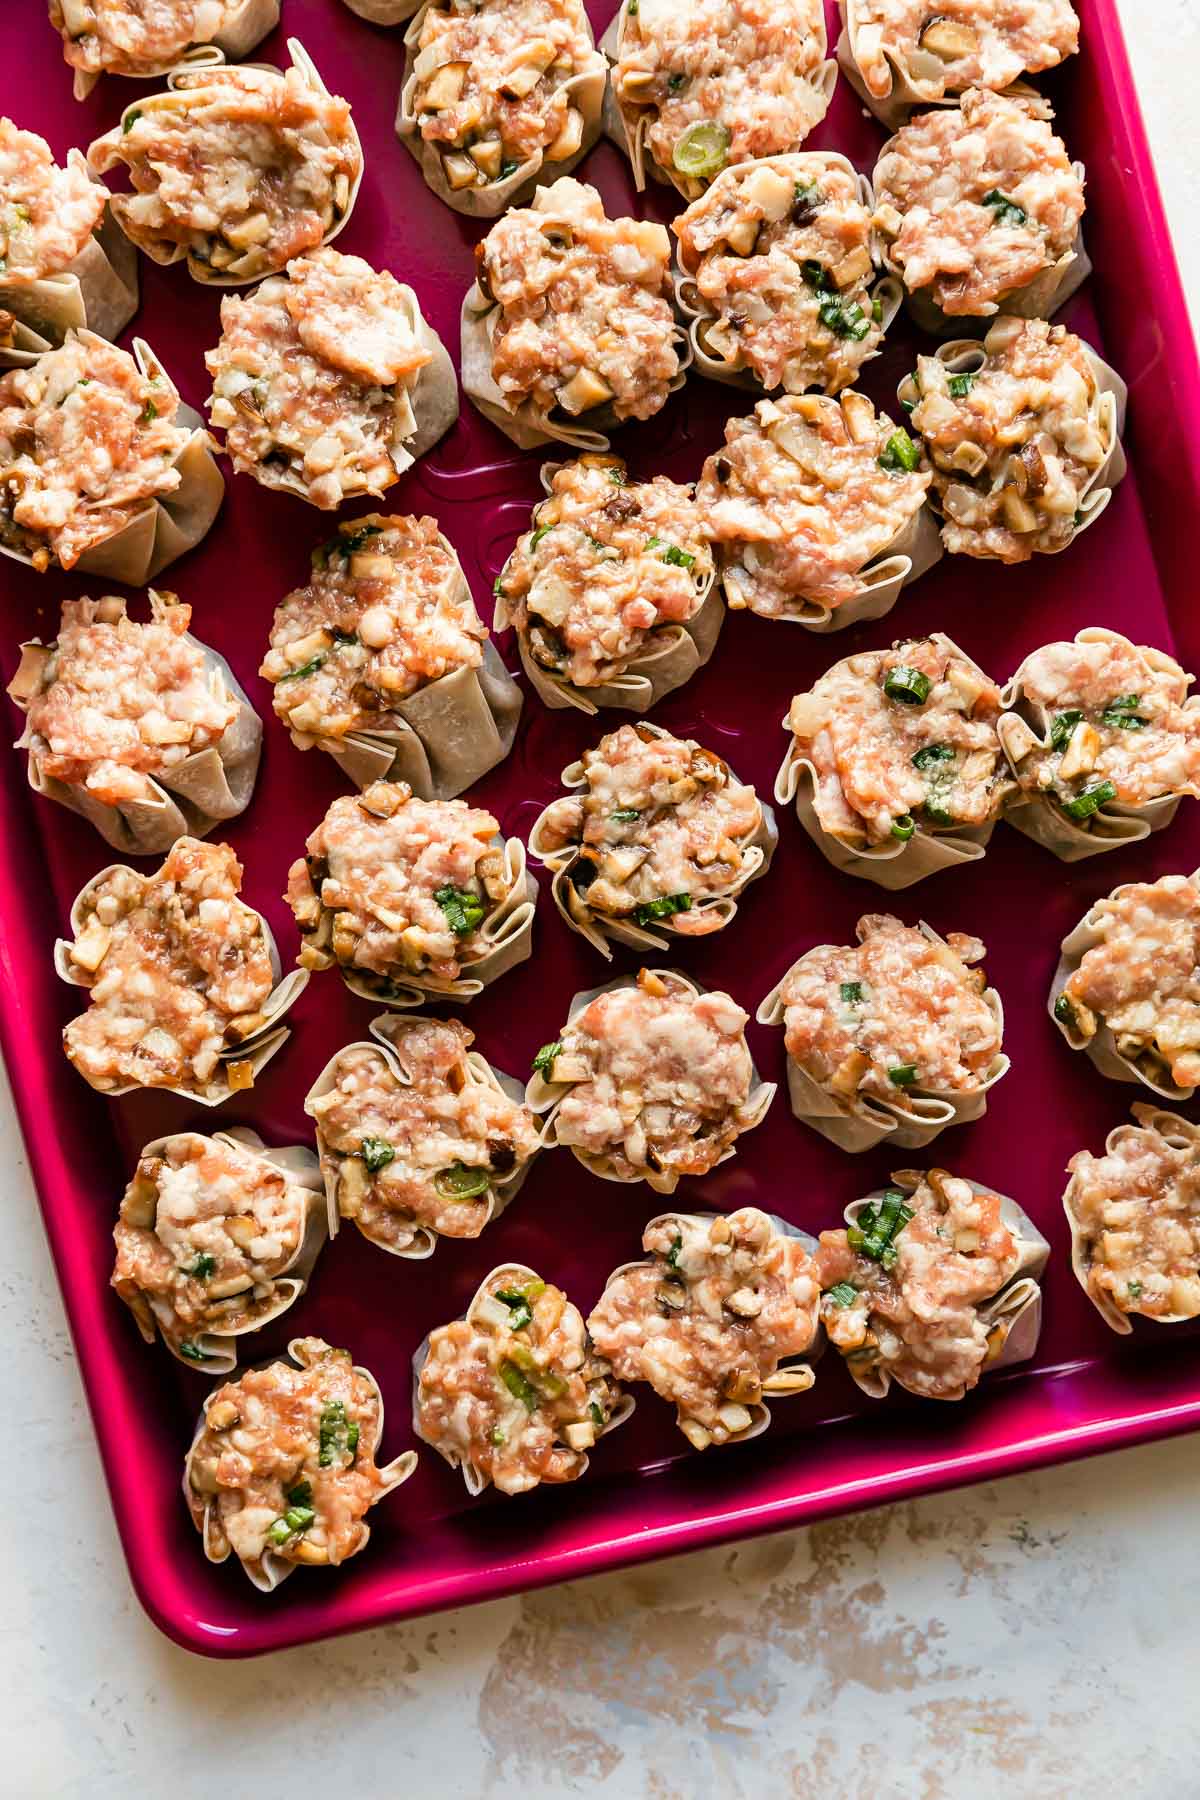 A pink baking sheet is filled with pork shumai dumplings. The baking sheet pan rests atop a creamy white textured surface.